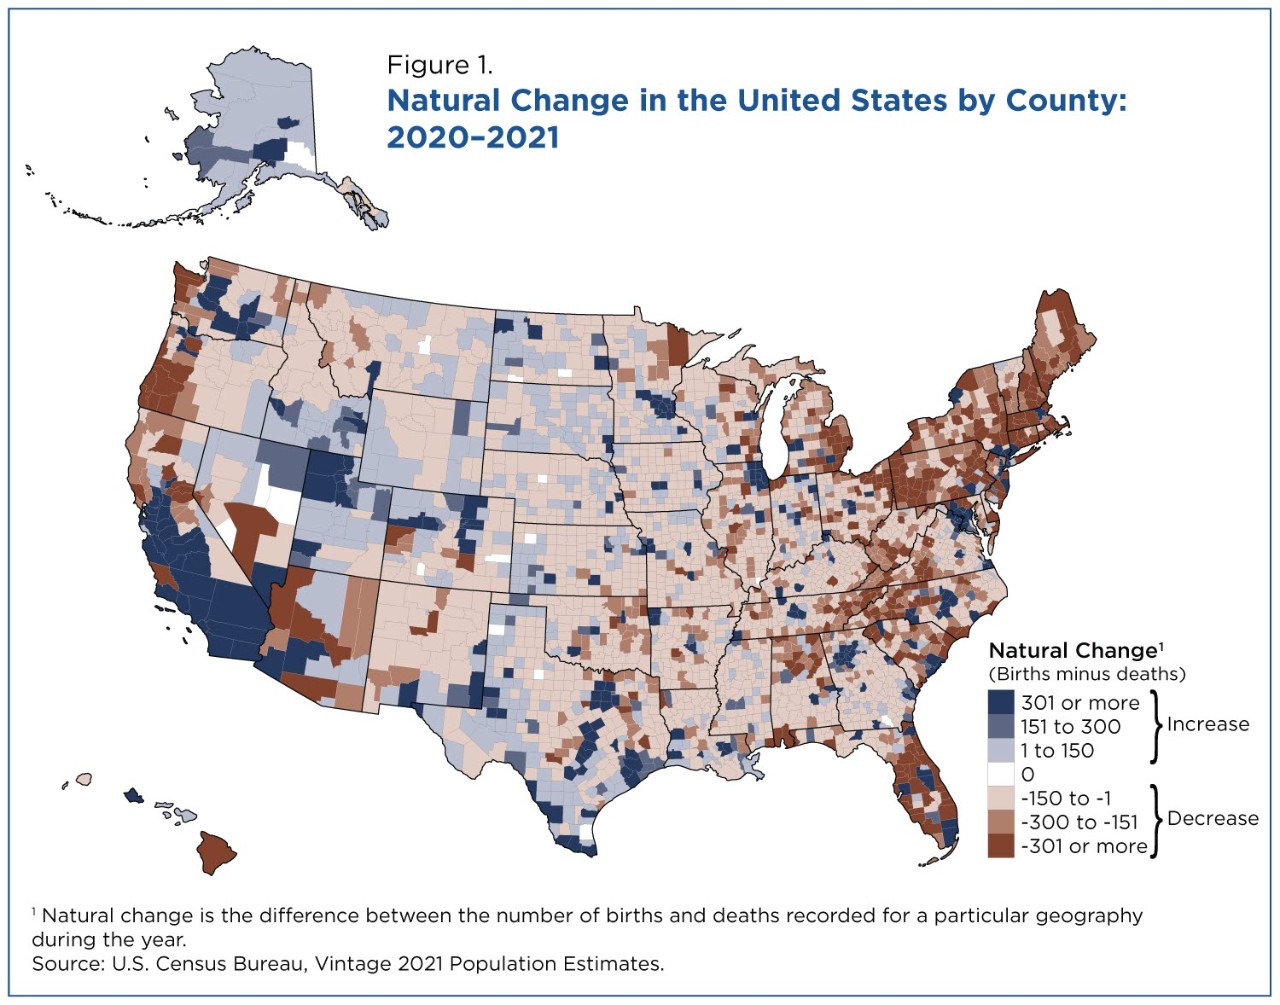 Natural change in the United States by county: 2020-2021